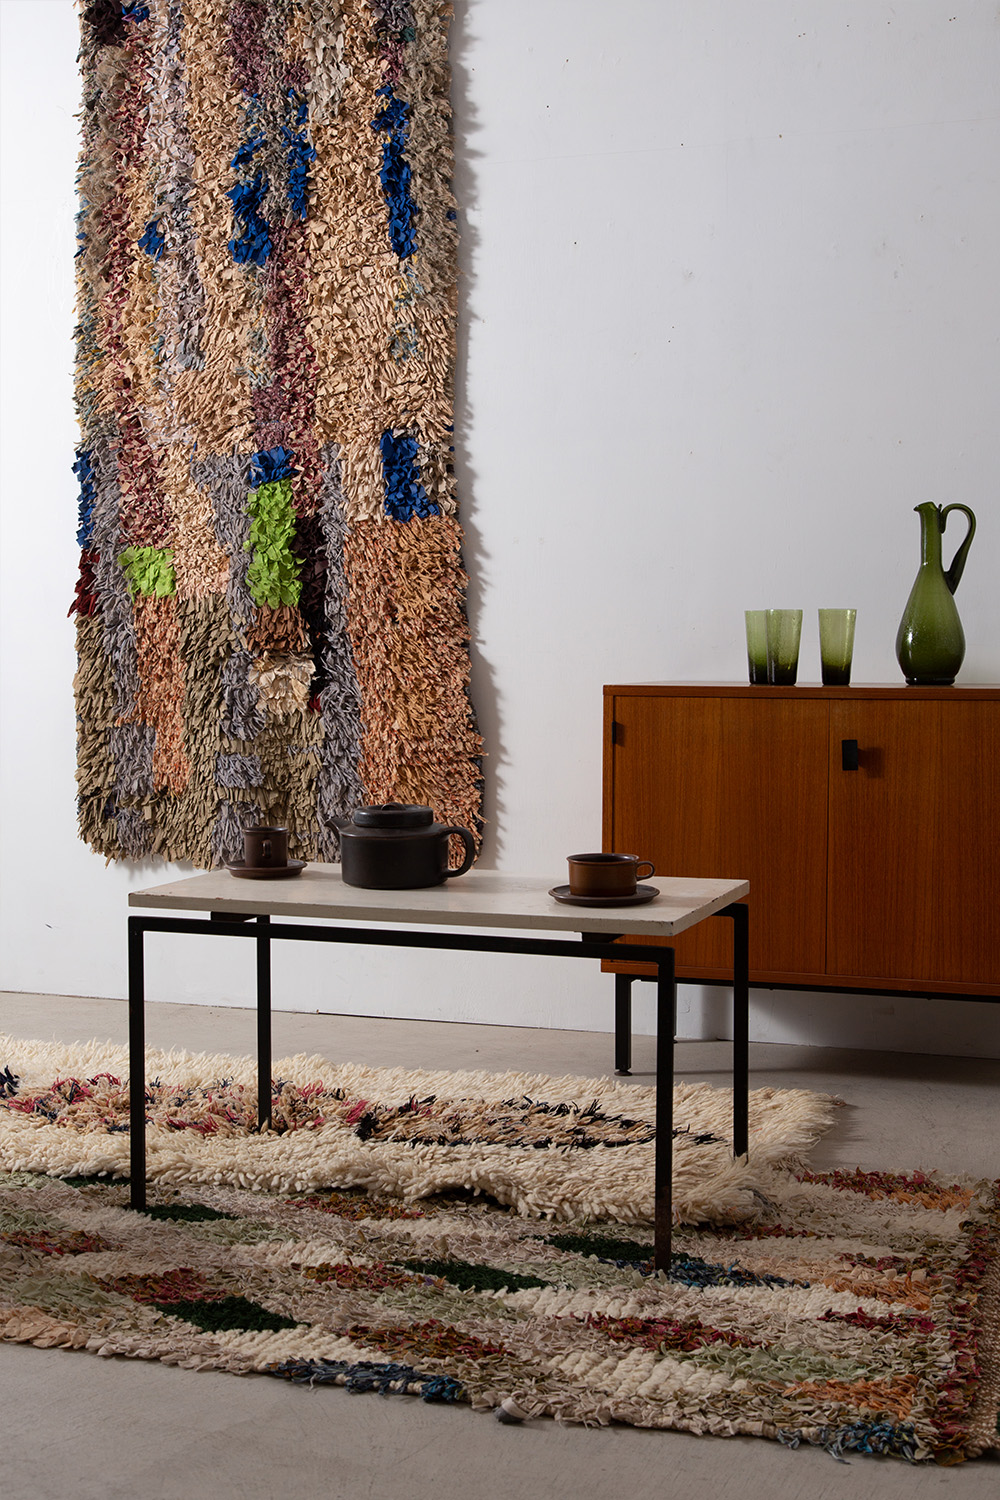 Moroccan Vintage Rugs Collection #003